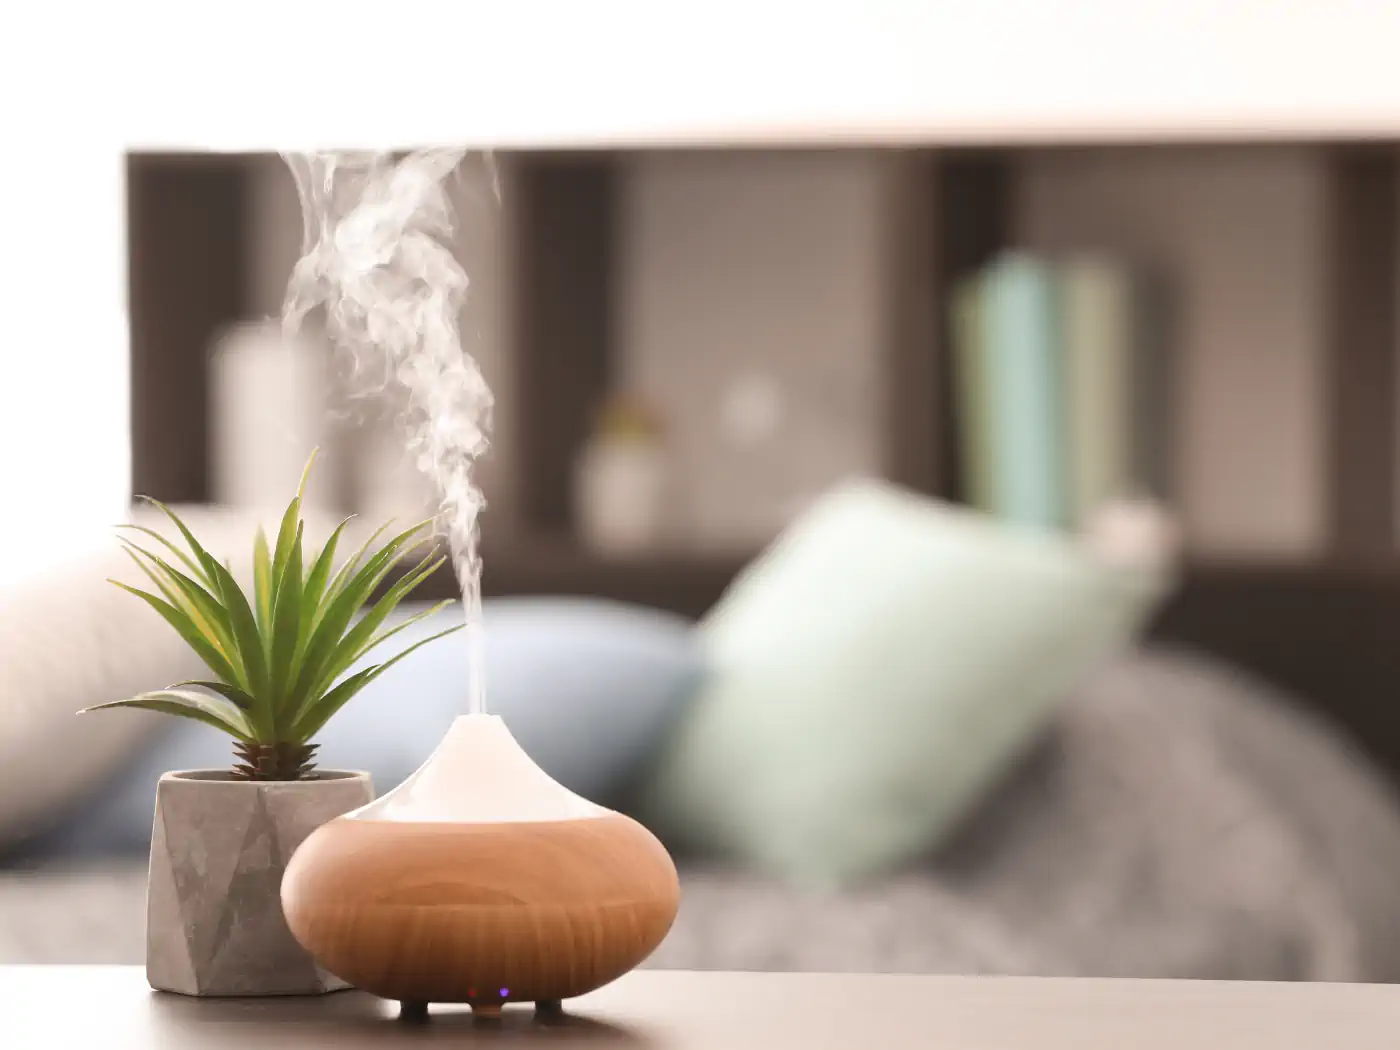 Essential oil diffuser emitting steam next to a small plant. Collection: Essential Oils, Fabulous Flowers & Gifts.